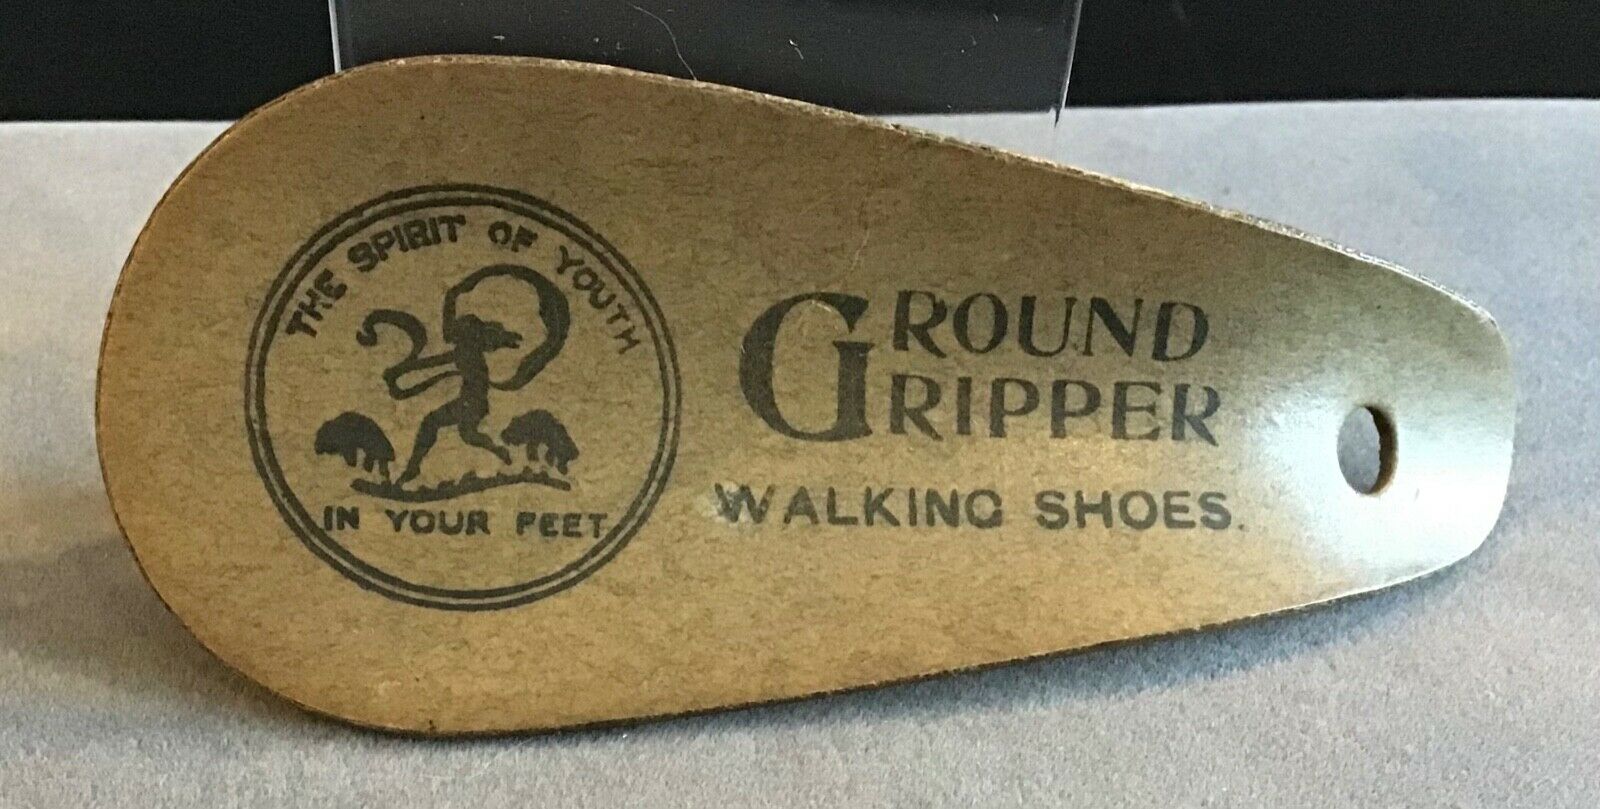 Vintage Ground Gripper Walking Shoes Tacoma WA Shoe Store Horn Feet foot